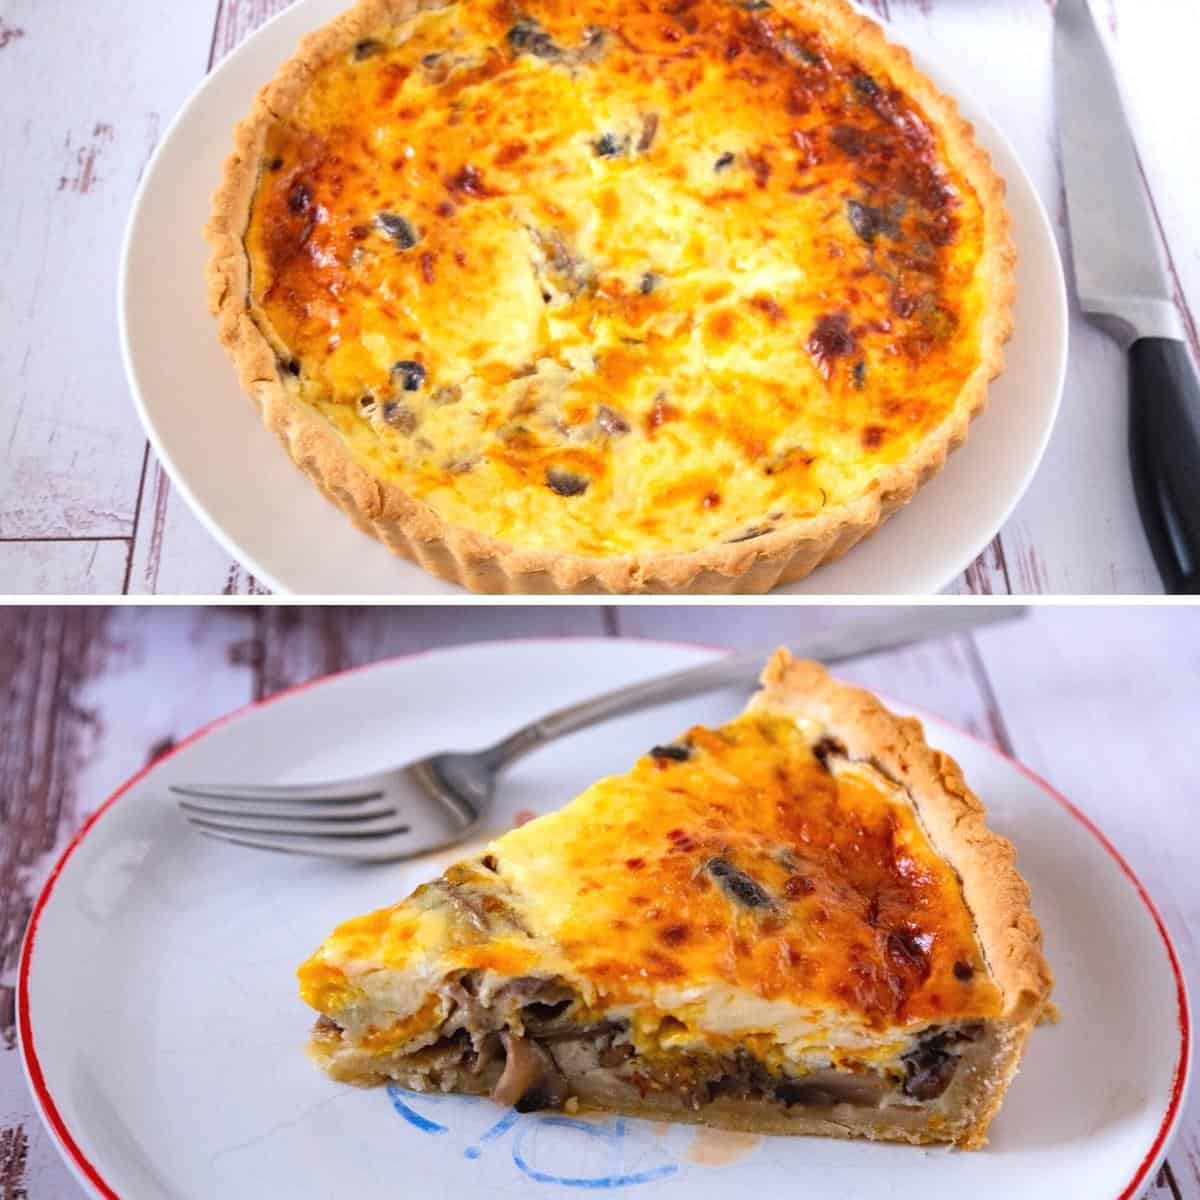 Pinterest image for quiche with mushrooms.